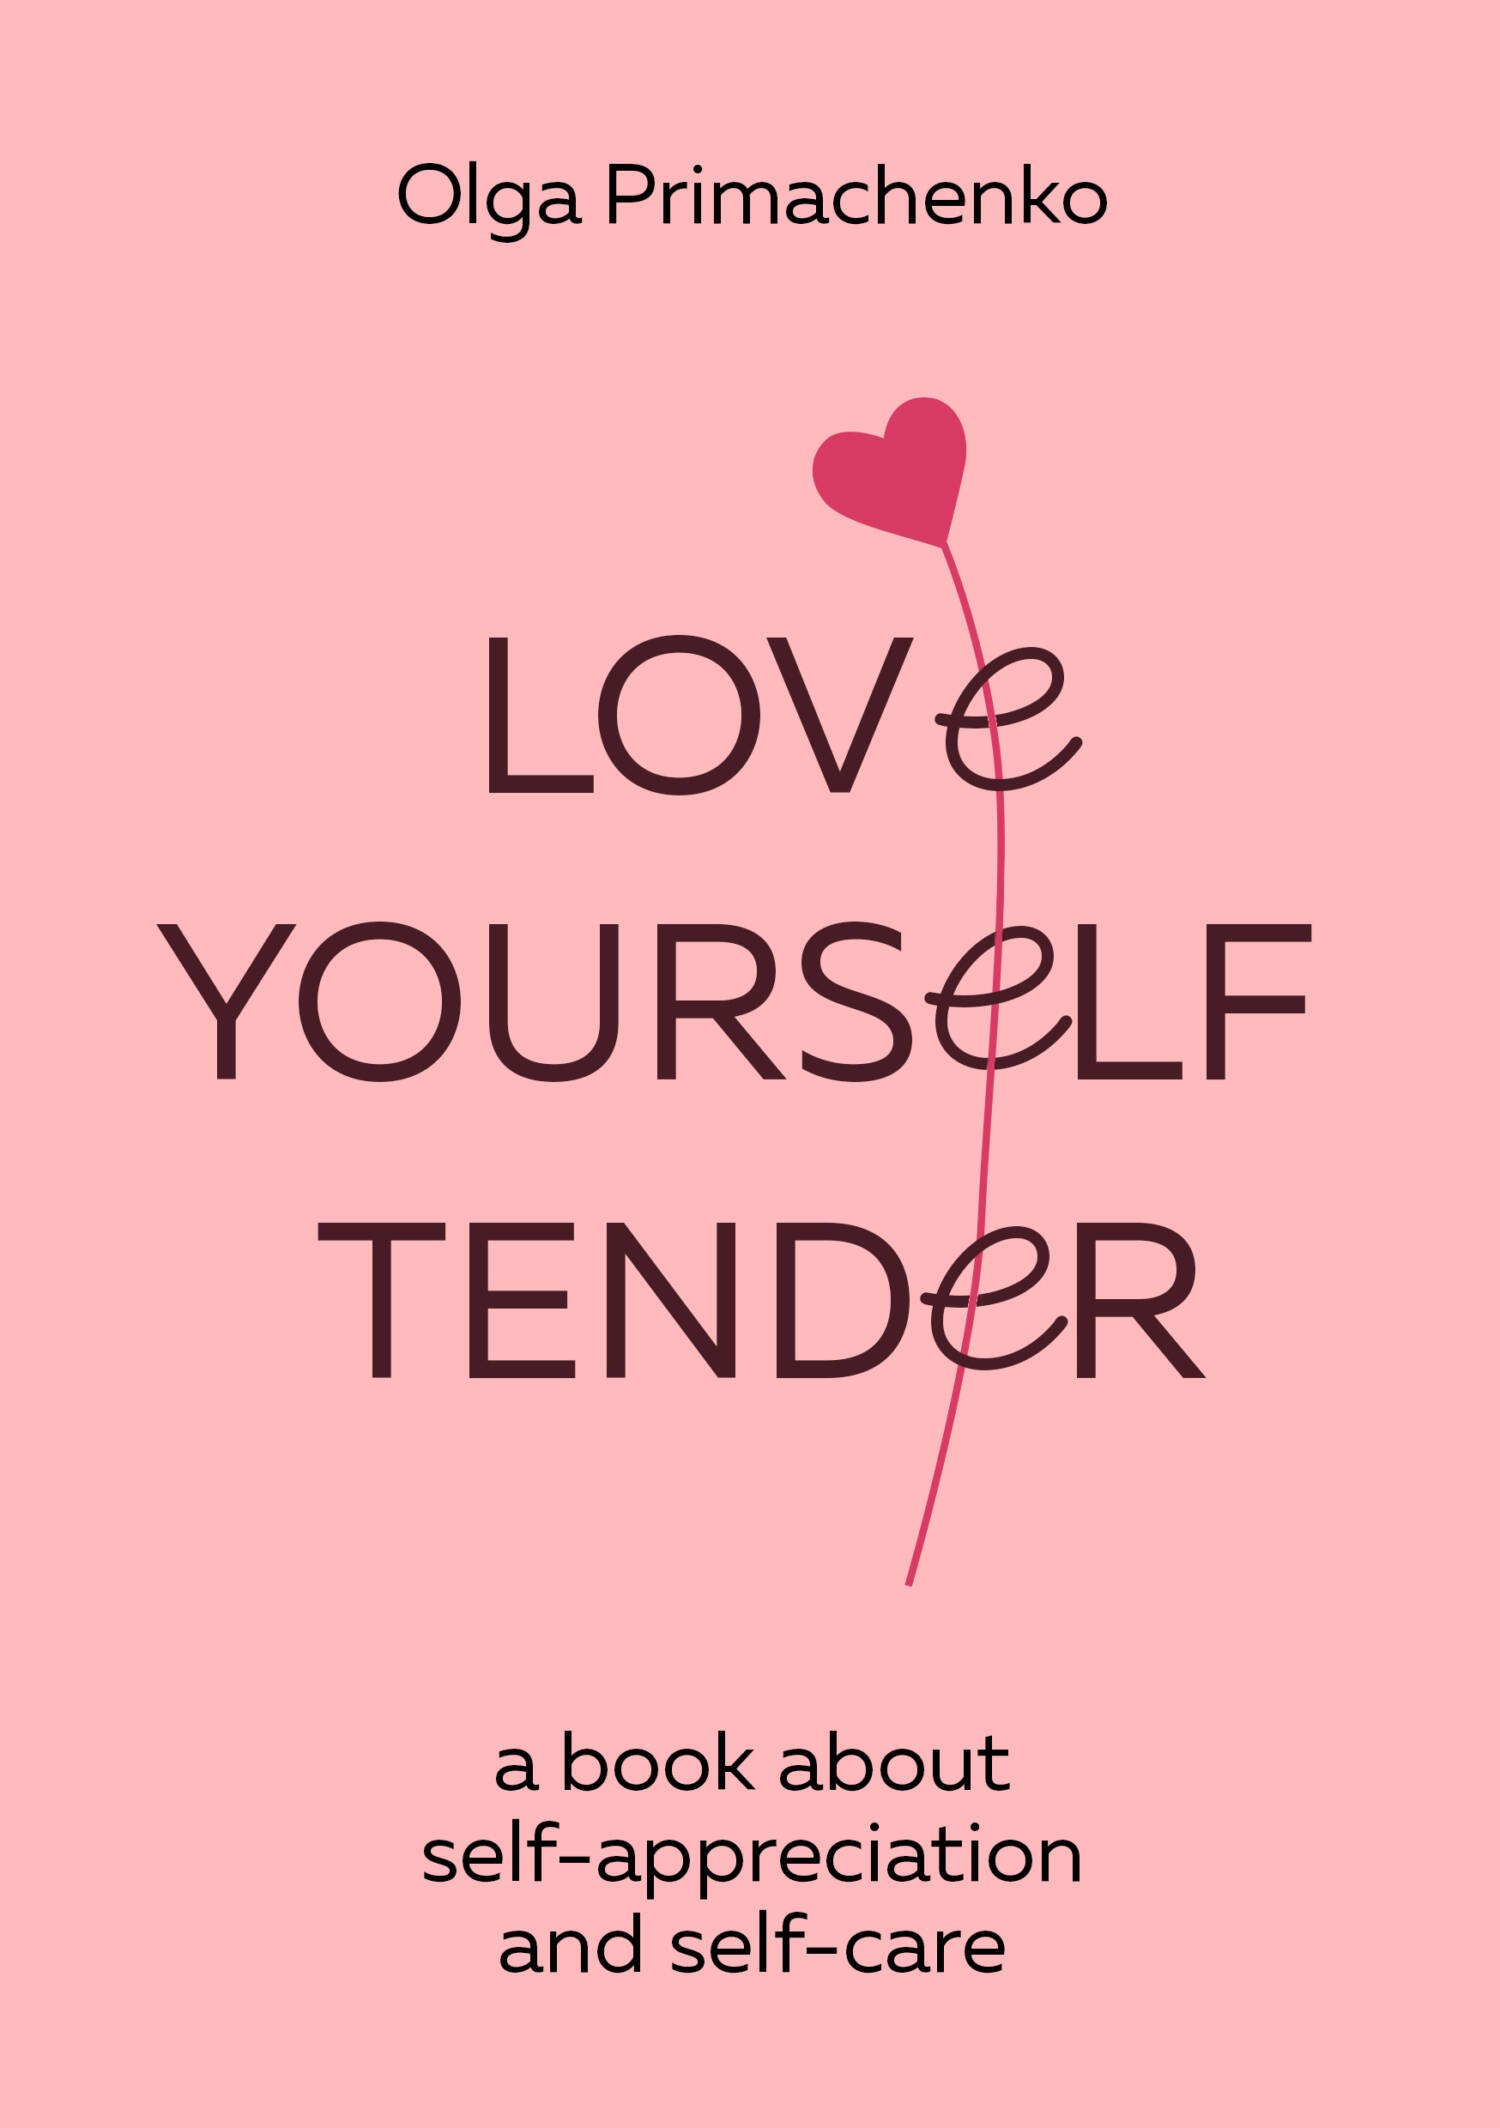 Love yourself tender. A book about self-appreciation and self-care